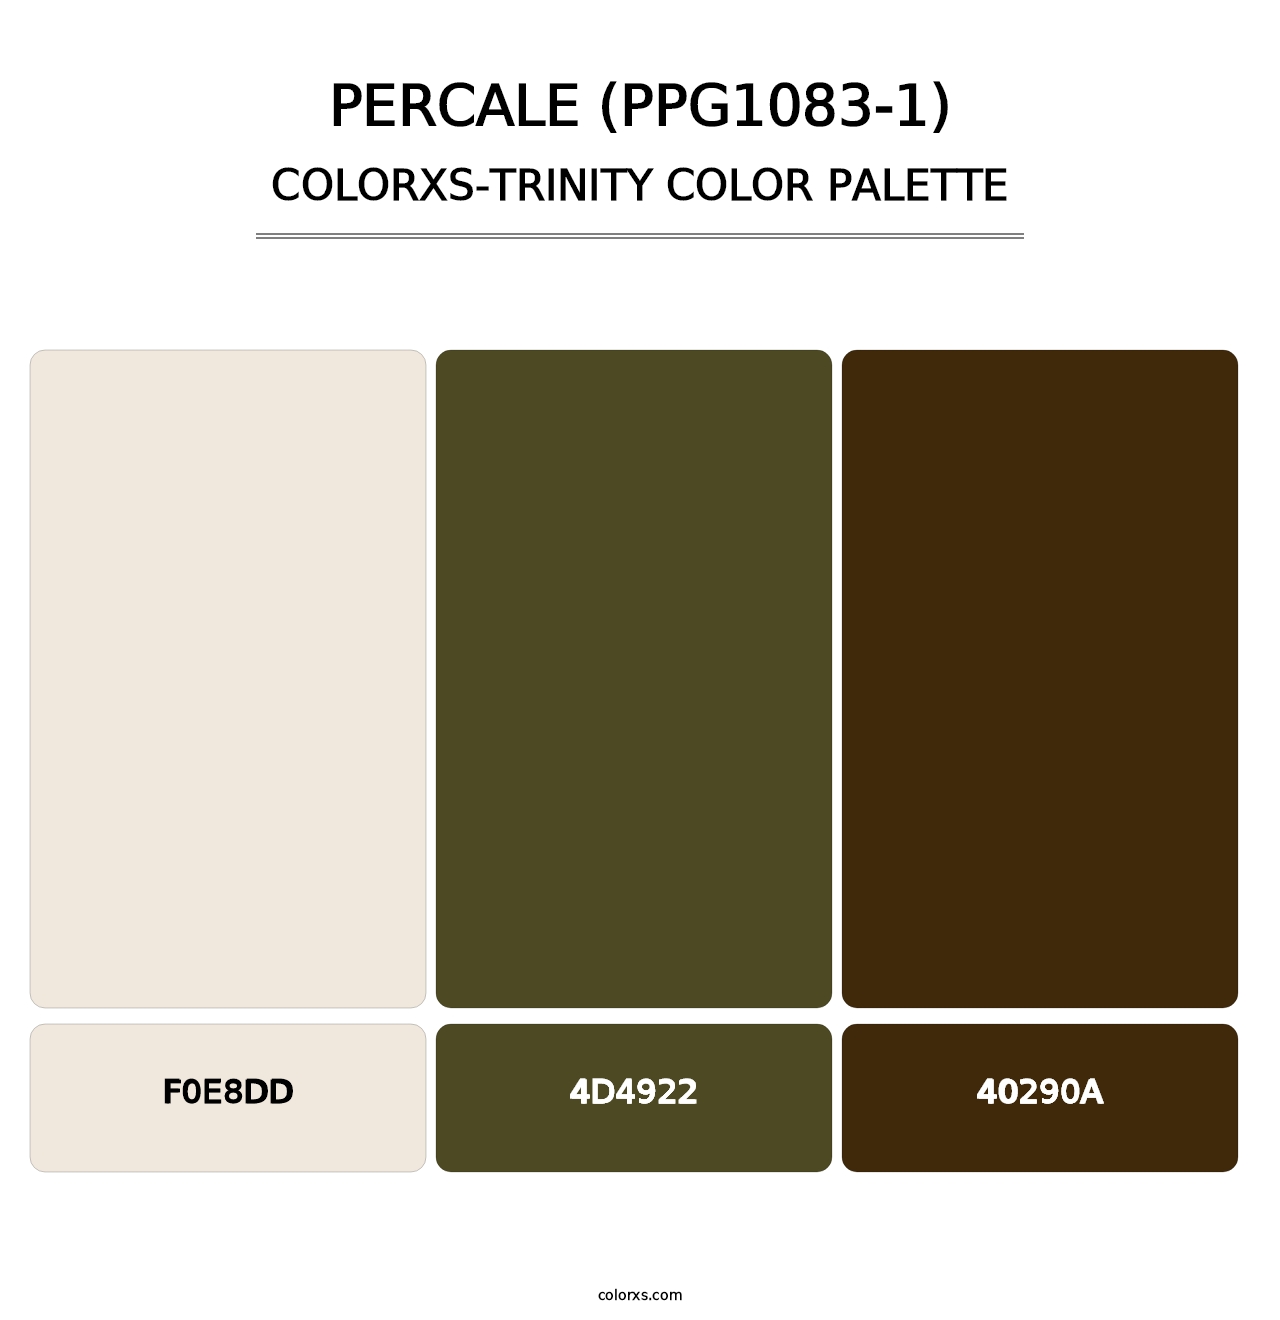 Percale (PPG1083-1) - Colorxs Trinity Palette